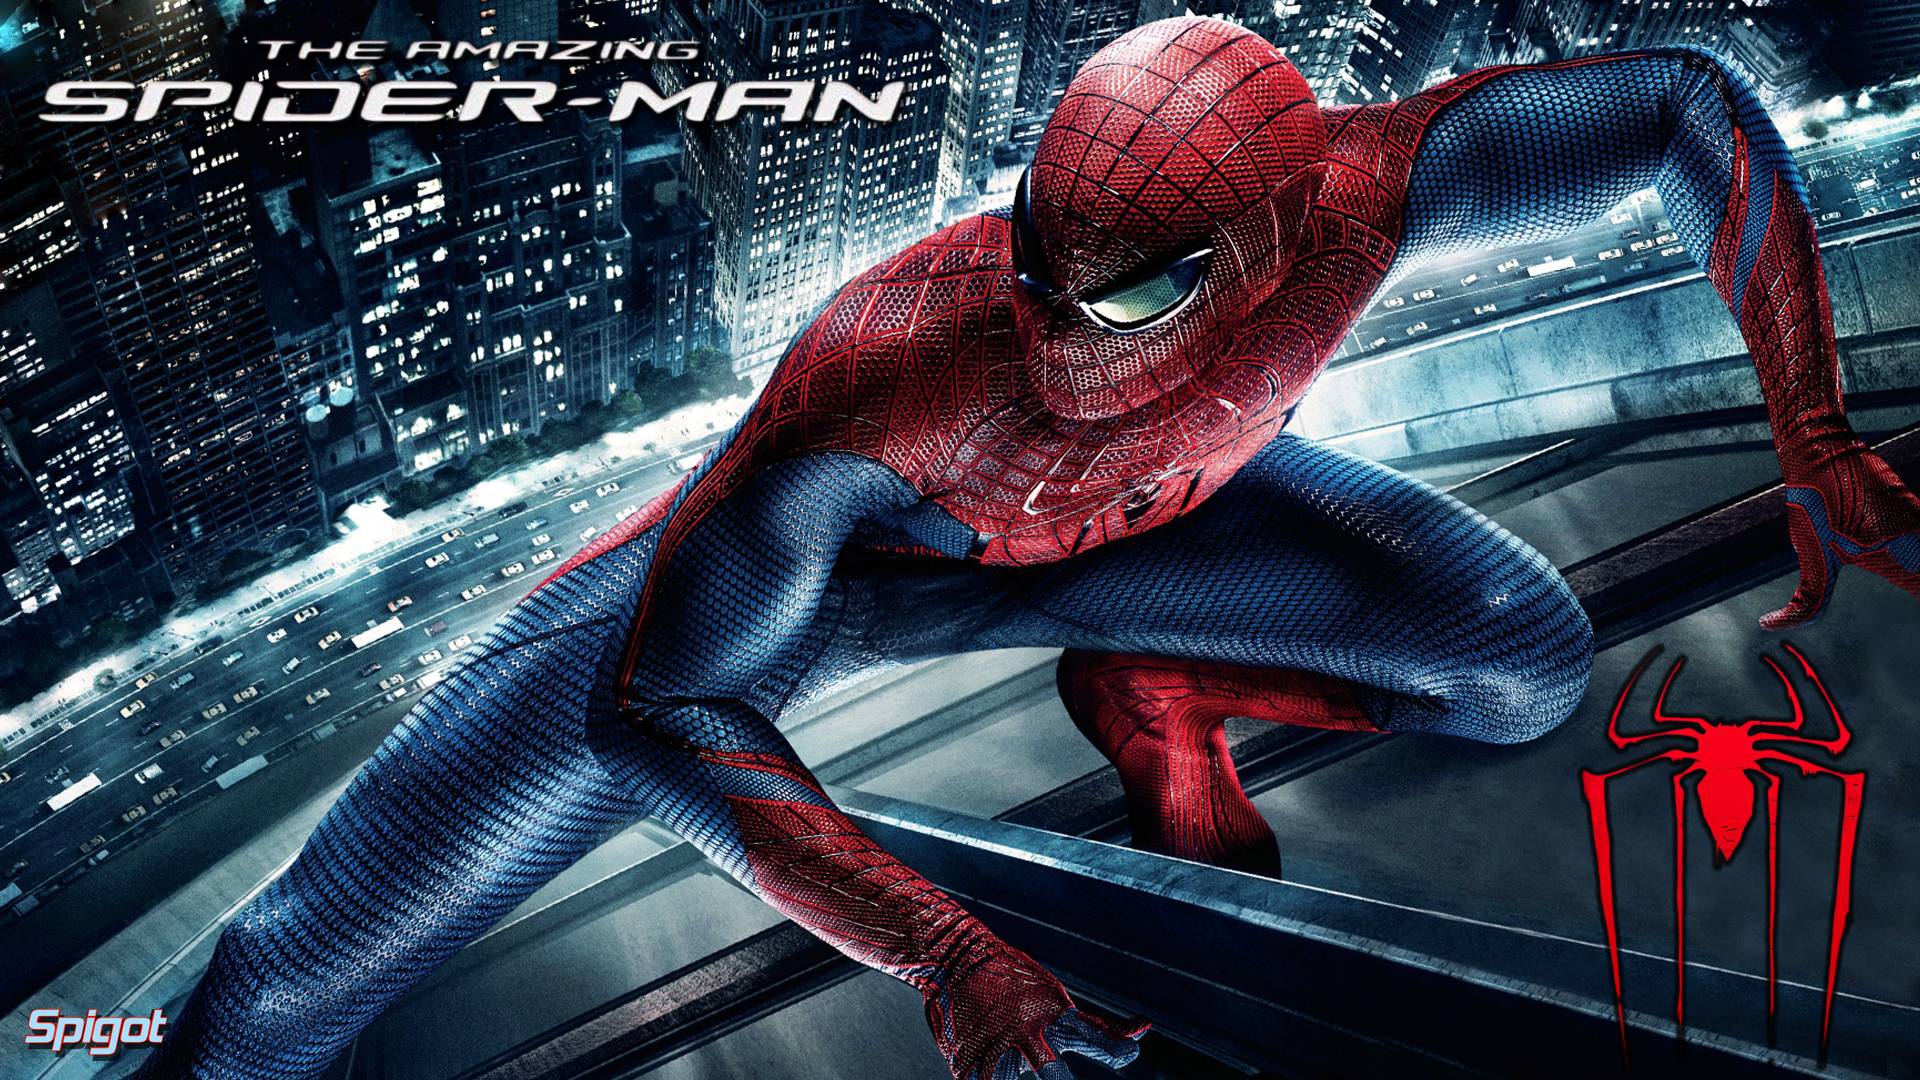 Awesome Spiderman Wallpaper 1920x1200PX Spiderman Wallpaper #